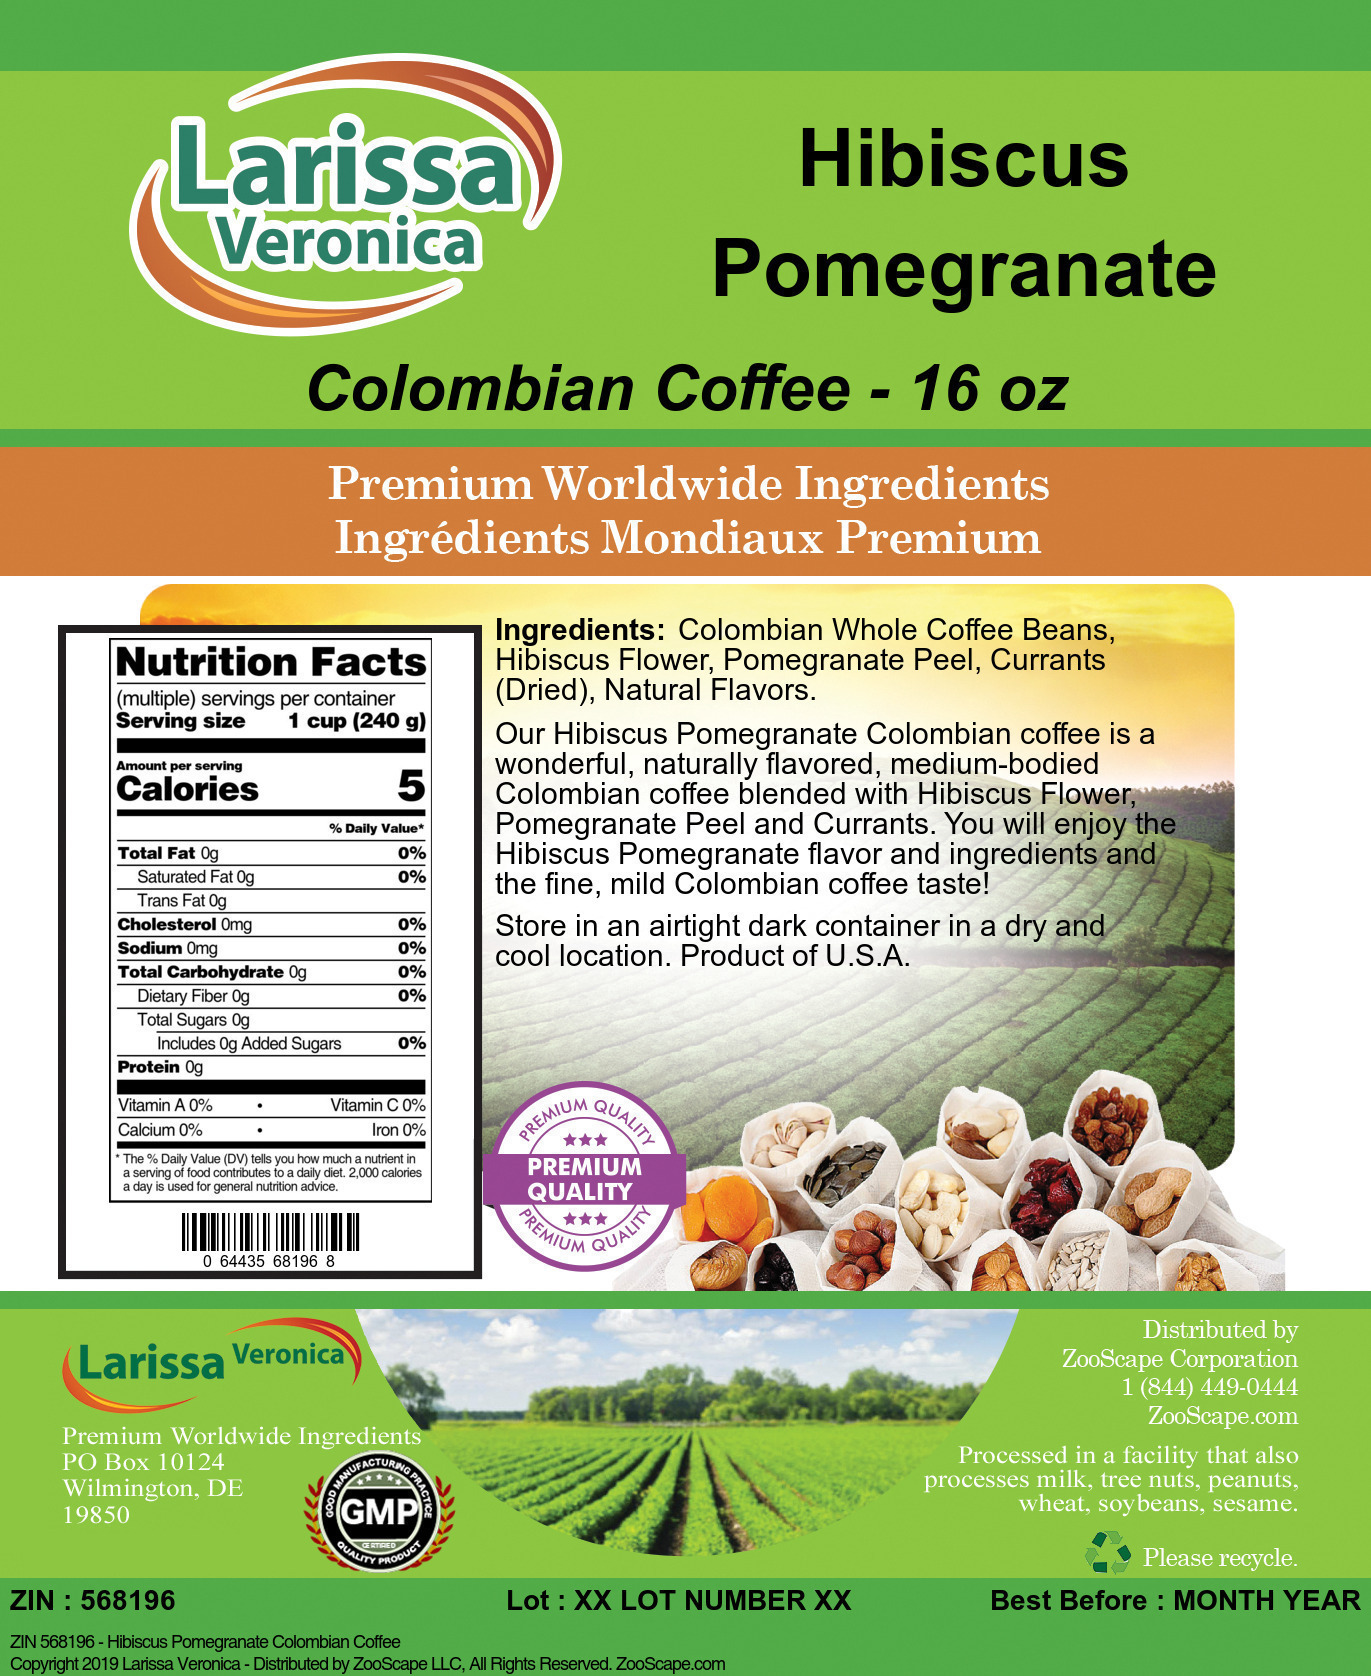 Hibiscus Pomegranate Colombian Coffee - Label